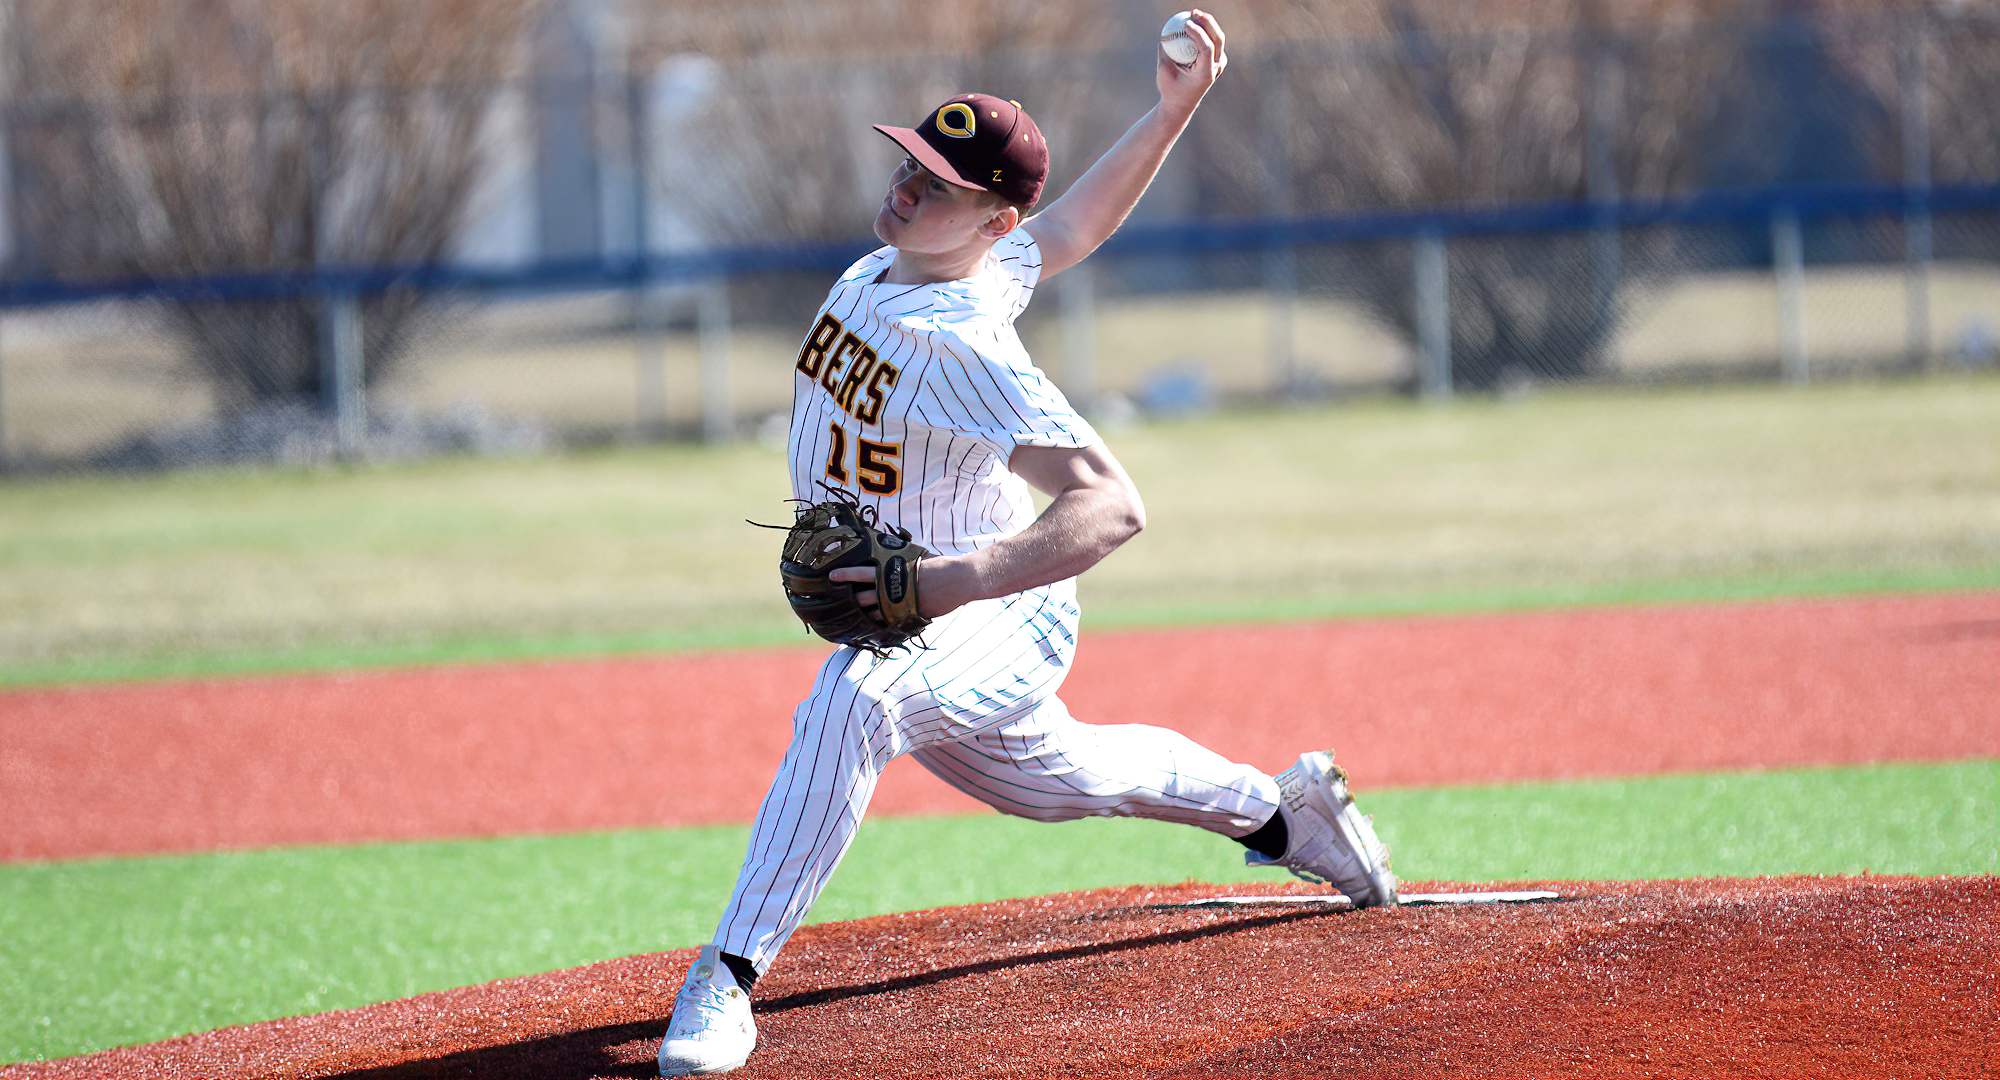 Jacoby Nold delivers a pitch during Game 2 of the Cobbers' sweep over Macalester. He pitched 6.0 innings and struck out a career-high seven batters.